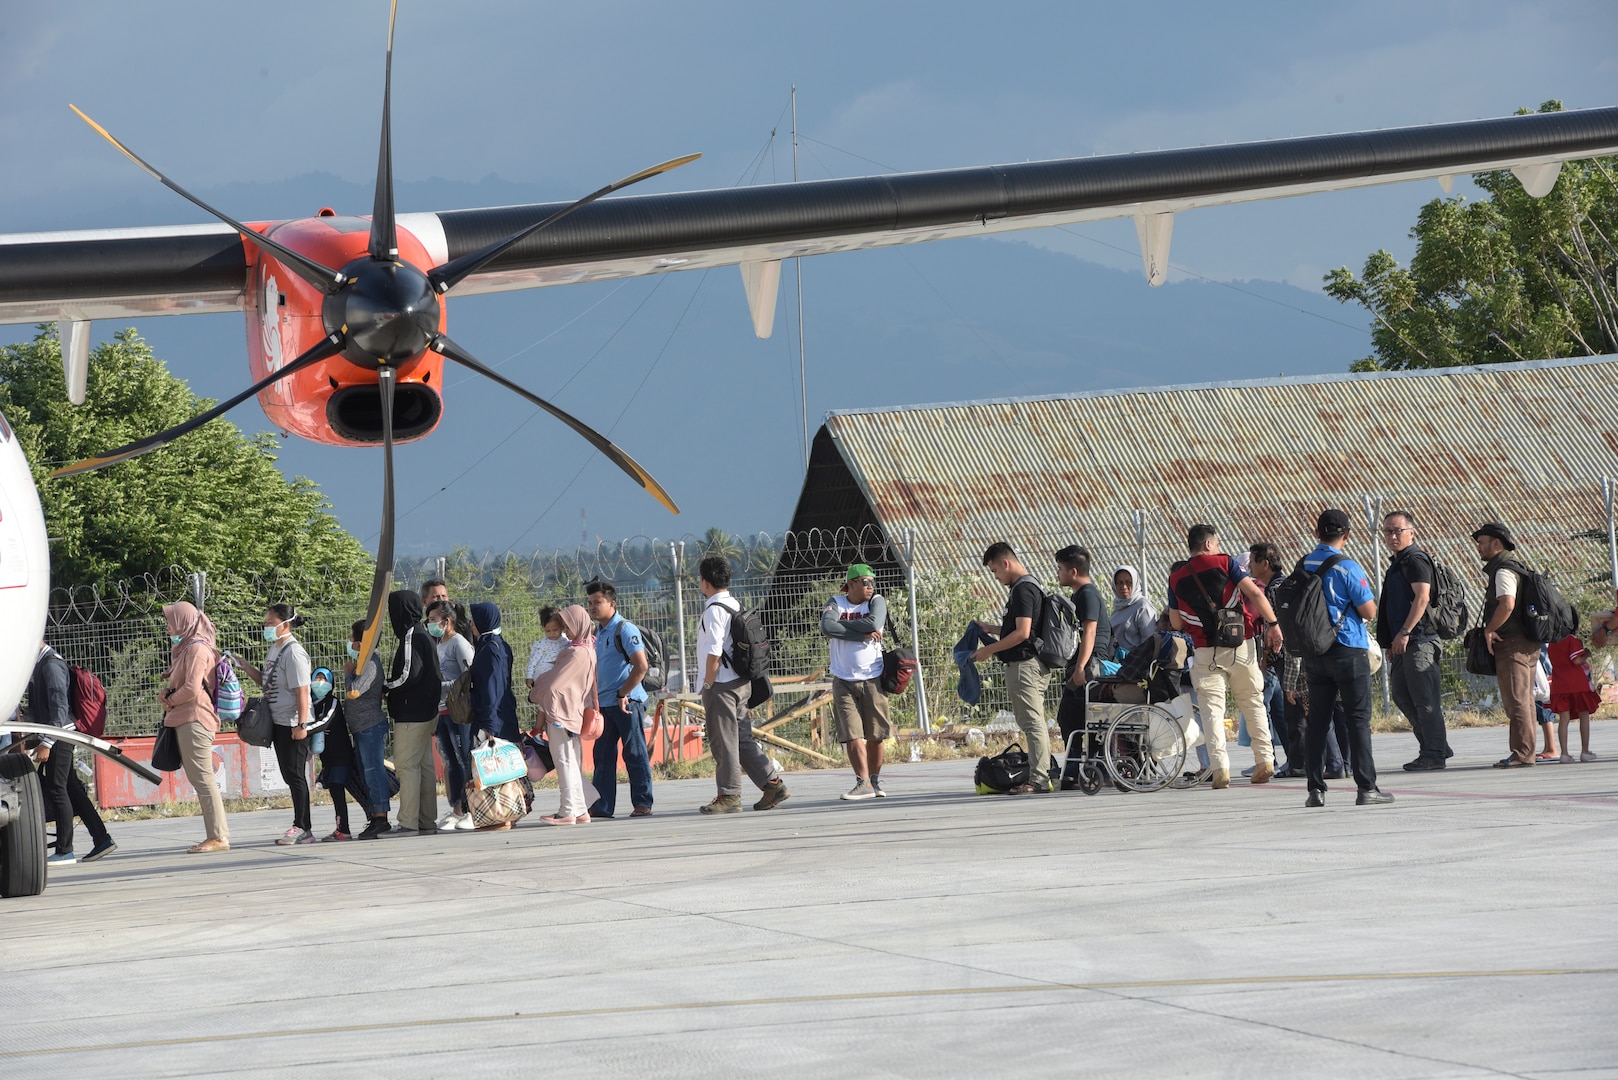 Evacuees prepare to board aircraft in Palu, Indonesia Oct. 6, 2018 after thousands were displaced after a 7.5 magnitude earthquake and tsunami struck Indonesia’s Sulawesi Island Sept. 28, 2018. The Indonesian Government and U.S. Agency for International Development are working alongside eight countries agencies and foreign militaries ensuring supplies, airlift, shelter and medical support reach those affected. (U.S. Air Force photo by Master Sgt. JT May III)